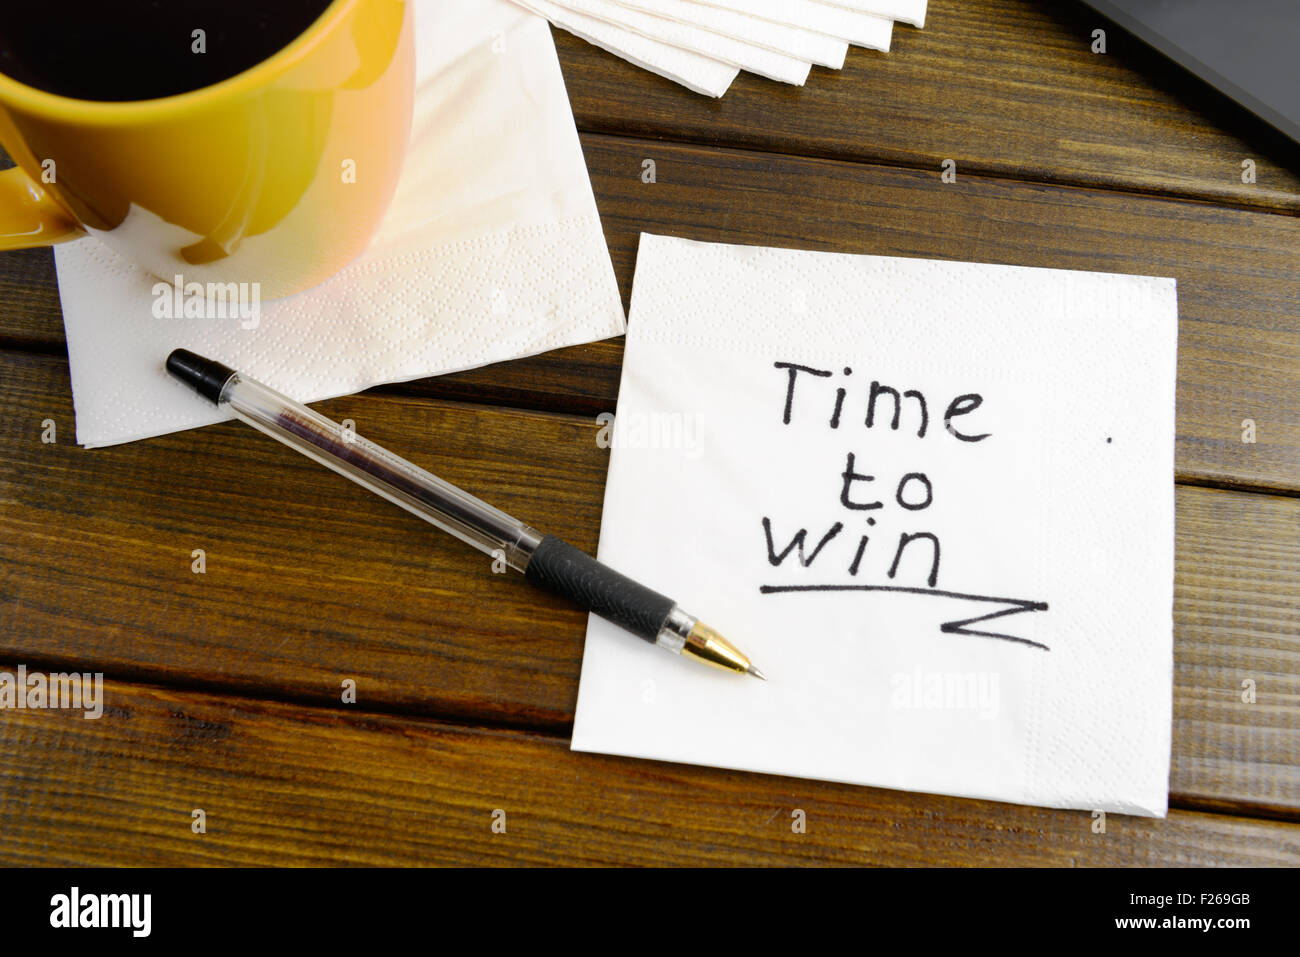 Time to win think positive -  handwriting on a napkin with a cup of coffee Stock Photo